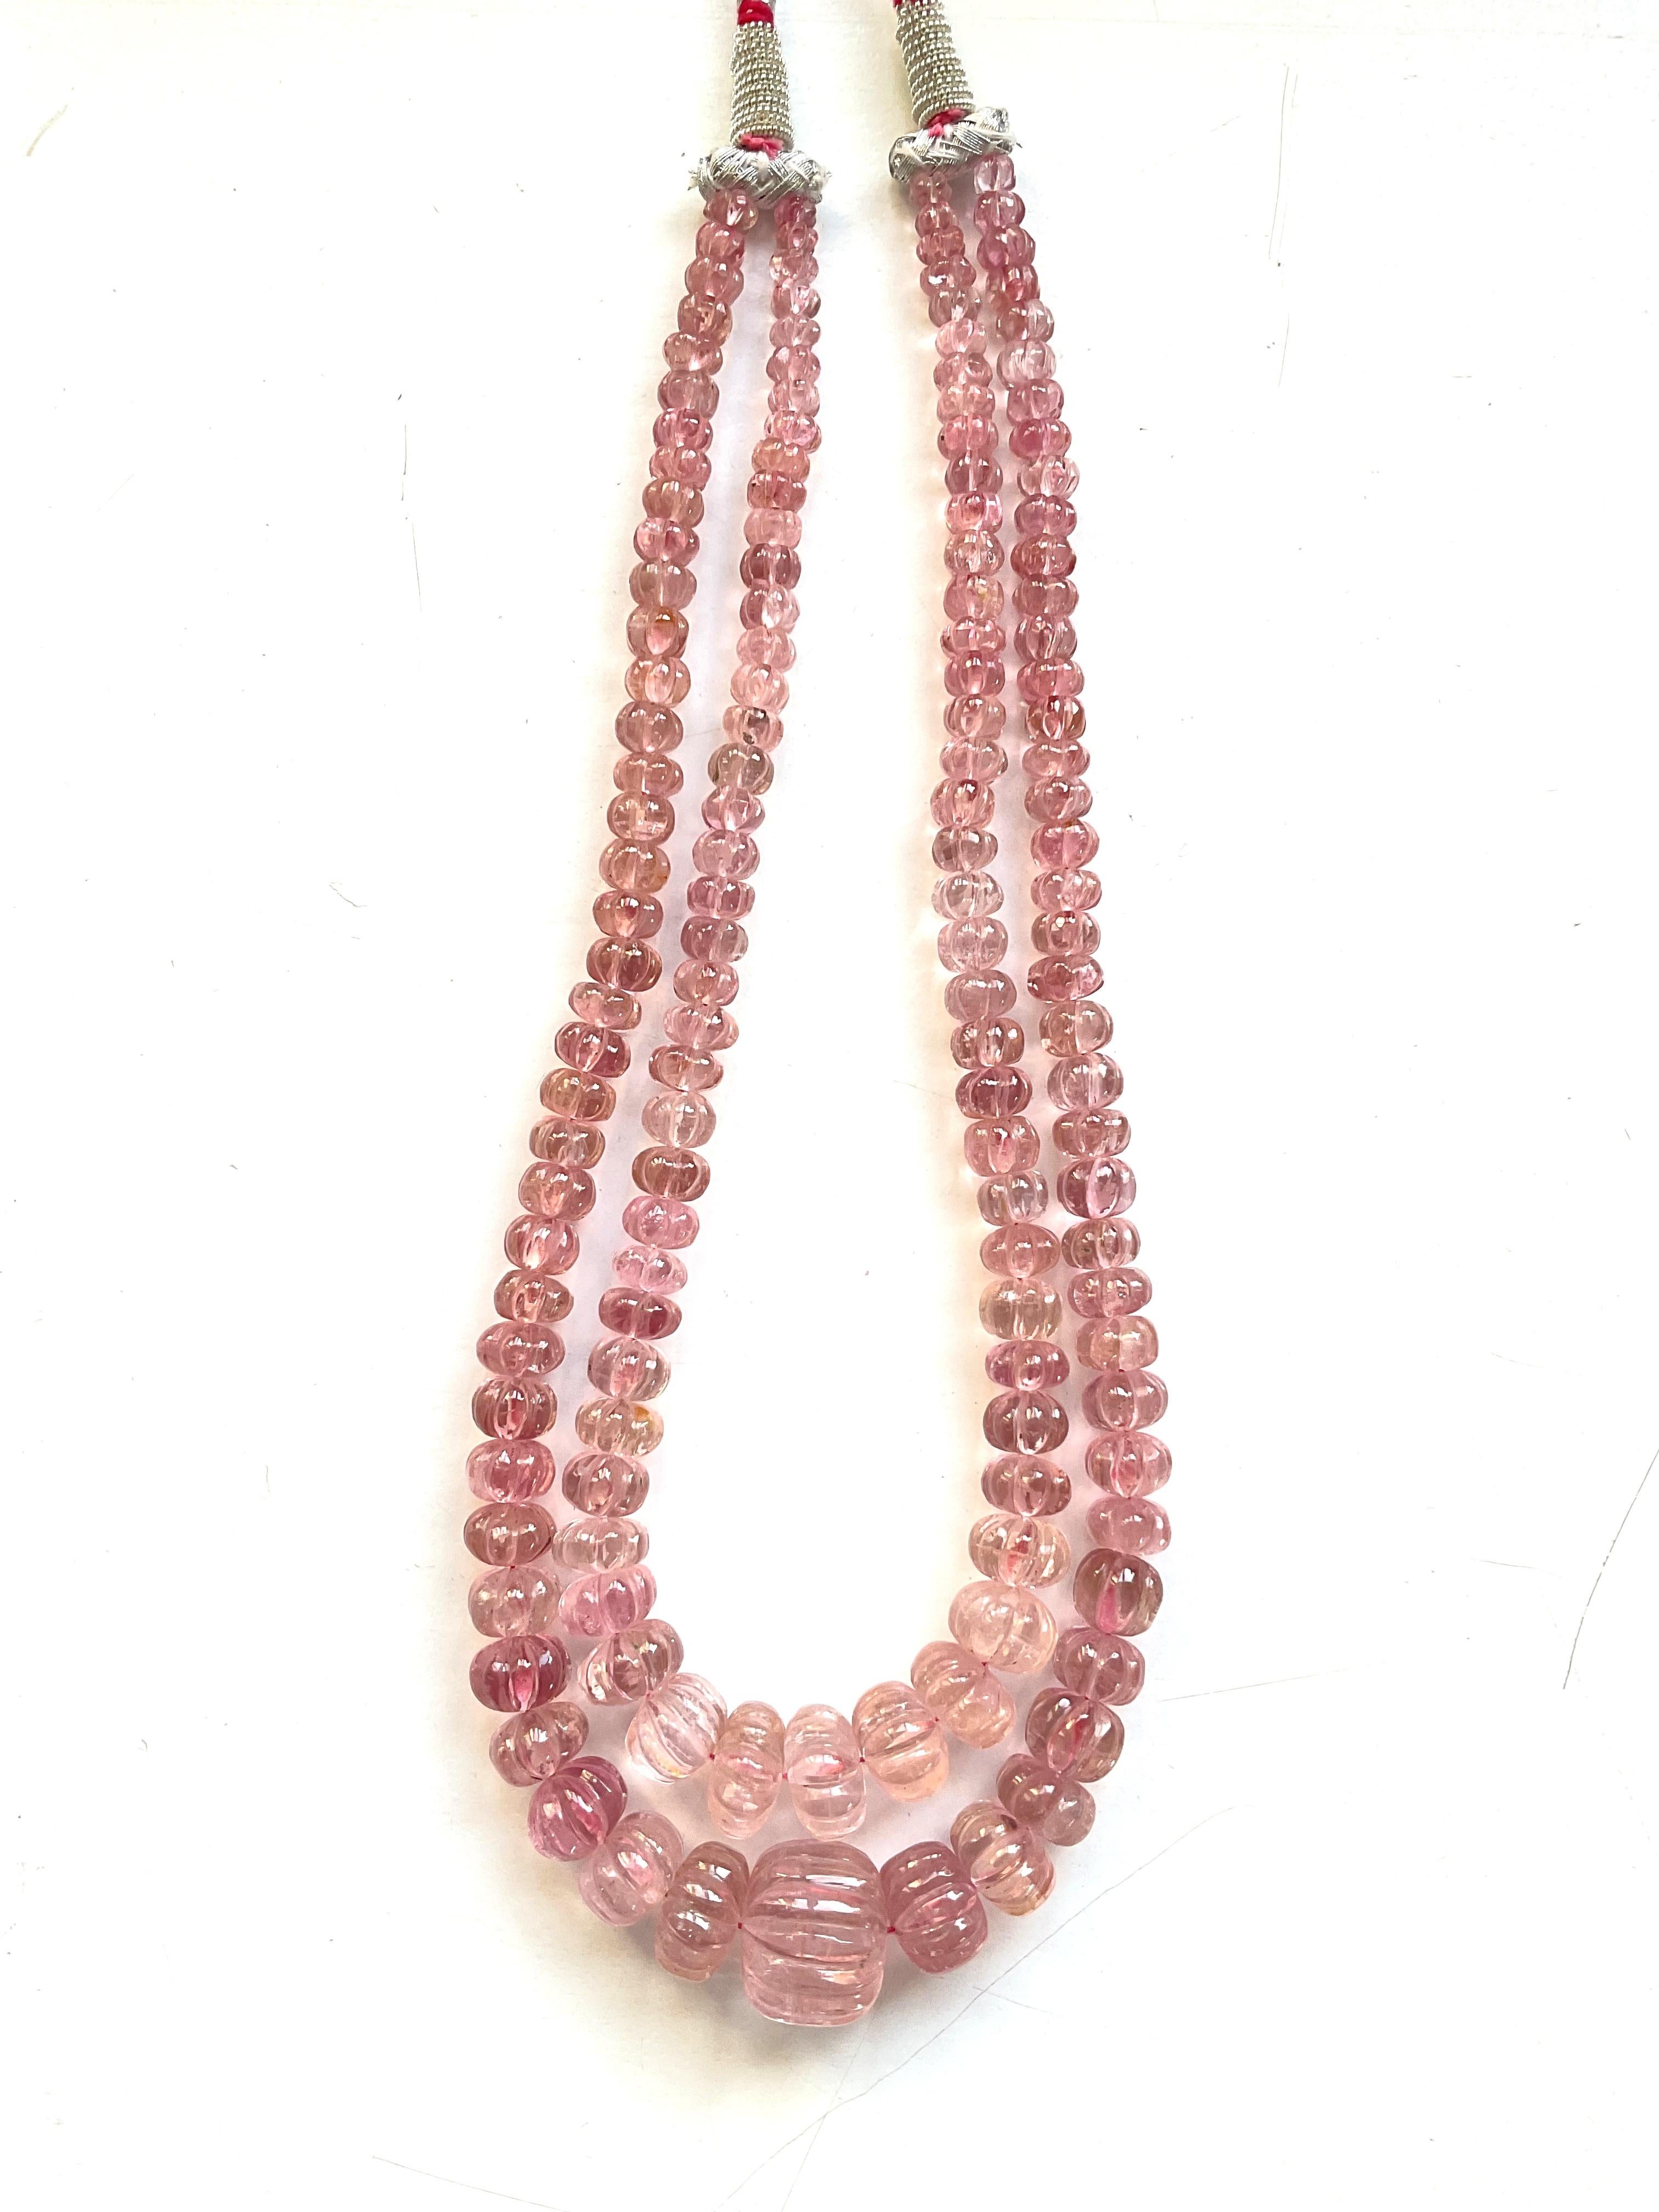 Women's or Men's 396.95 Carats pink Tourmaline carved melon beads necklace Jewelry Natural Gem For Sale